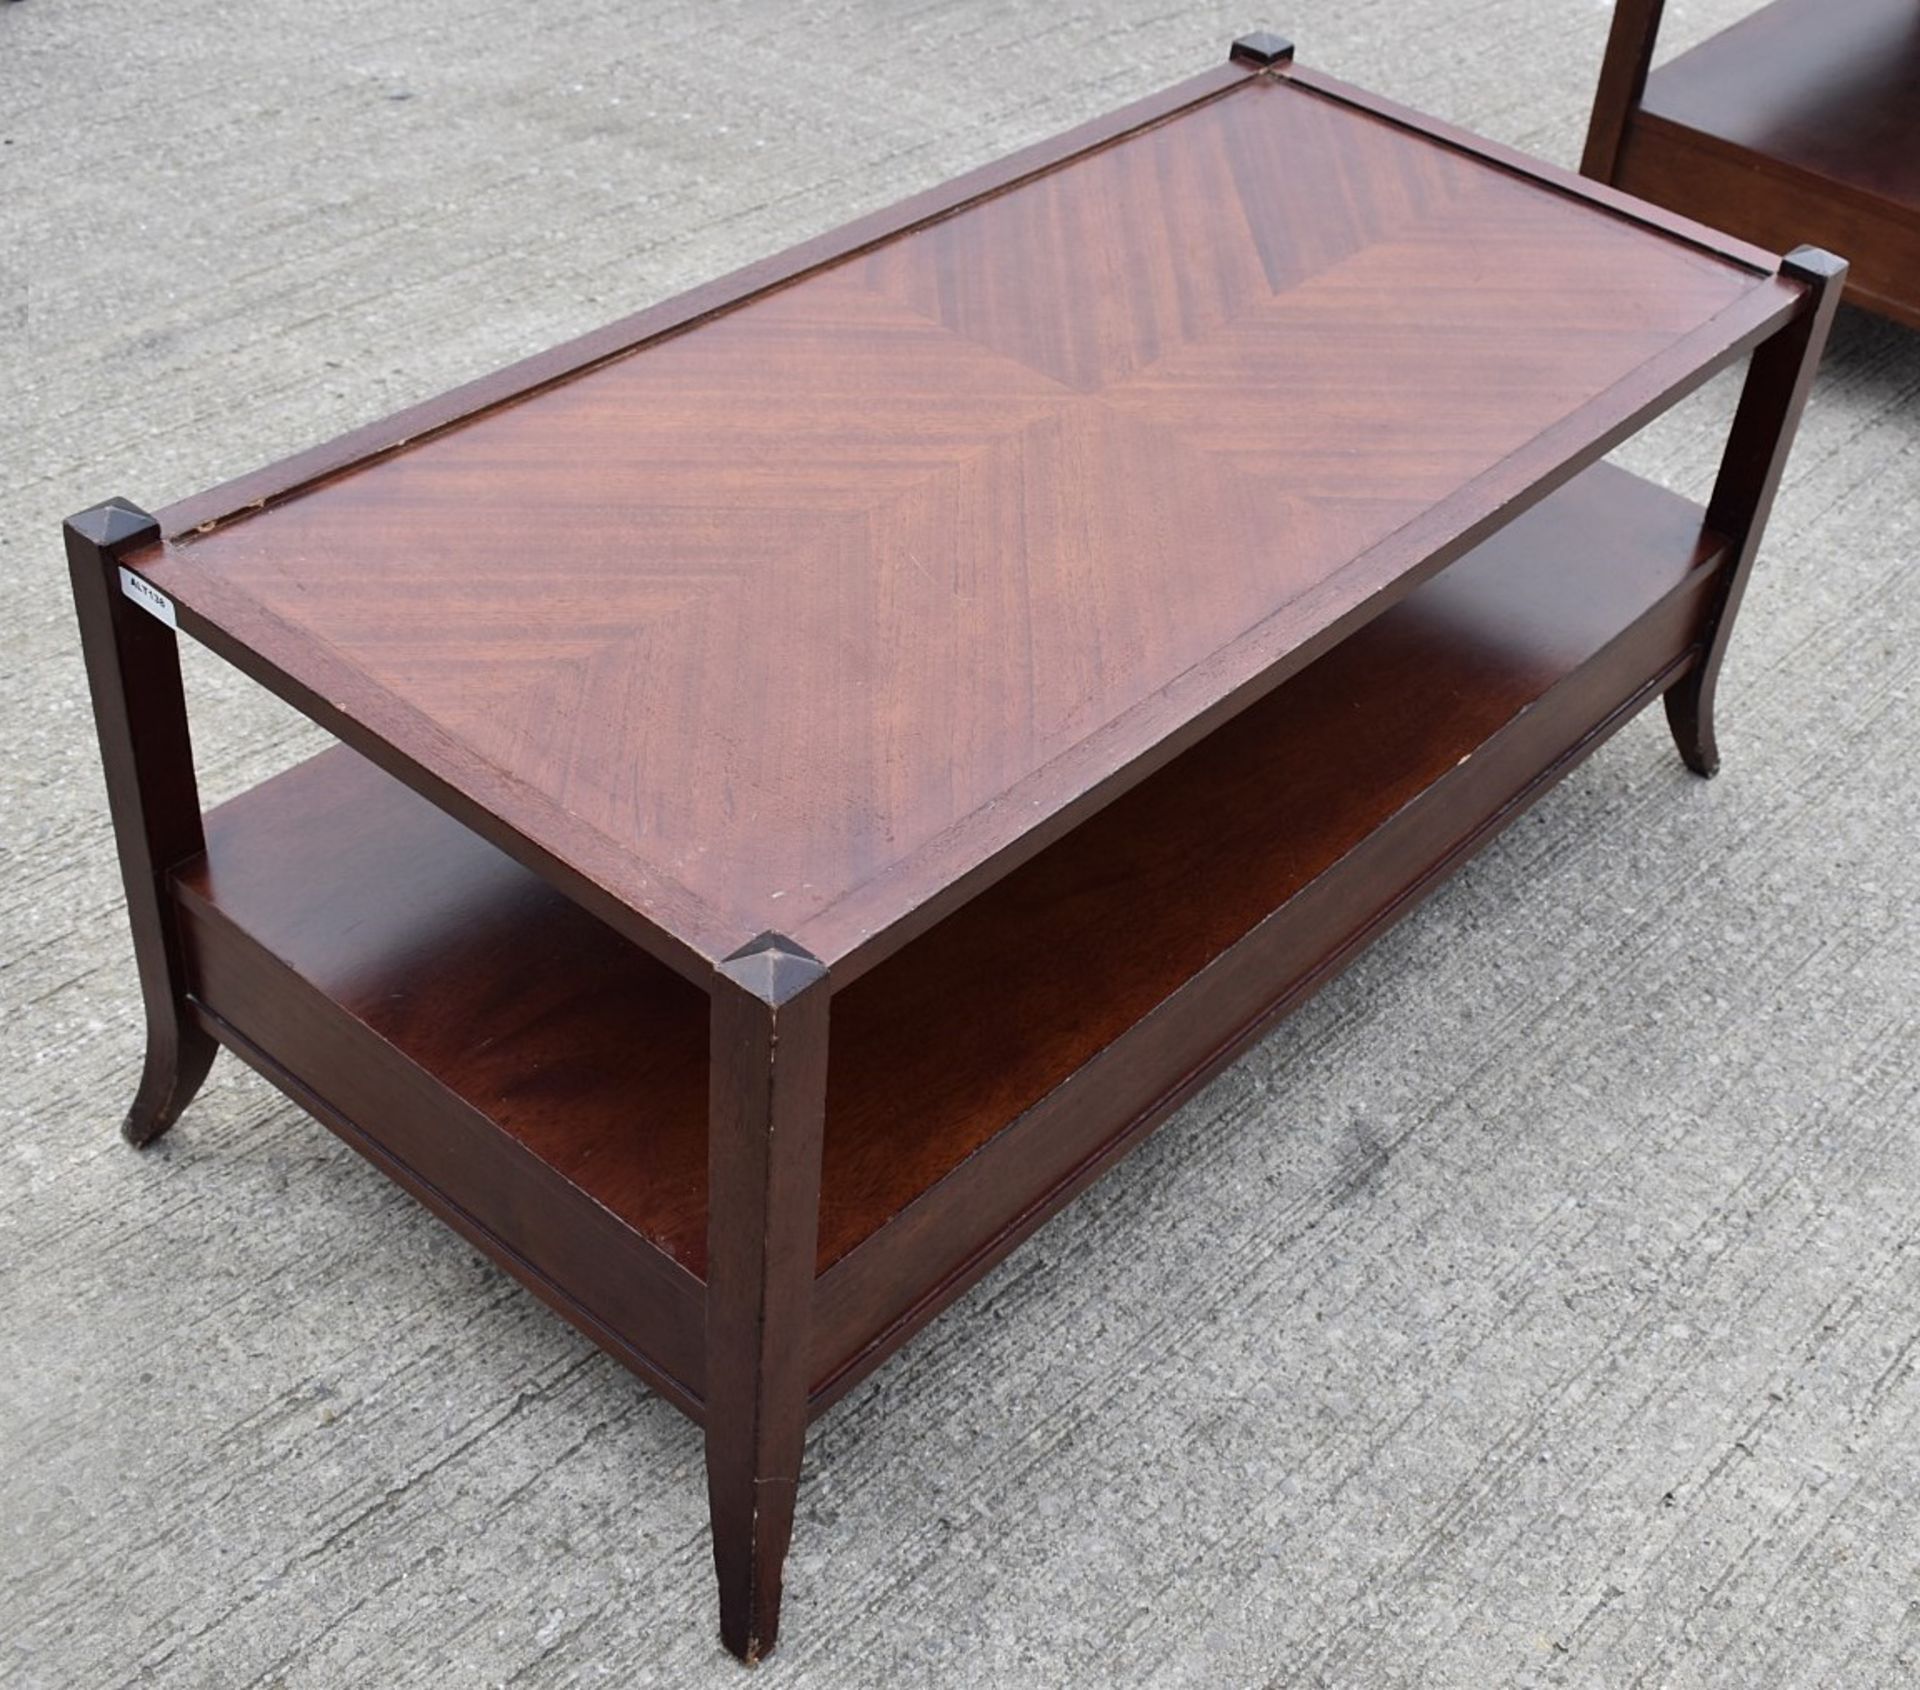 1 x Elegant Handcrafted Solid Wood Coffee / Cocktail Table with False Drawer Frontage - Recently - Image 2 of 2